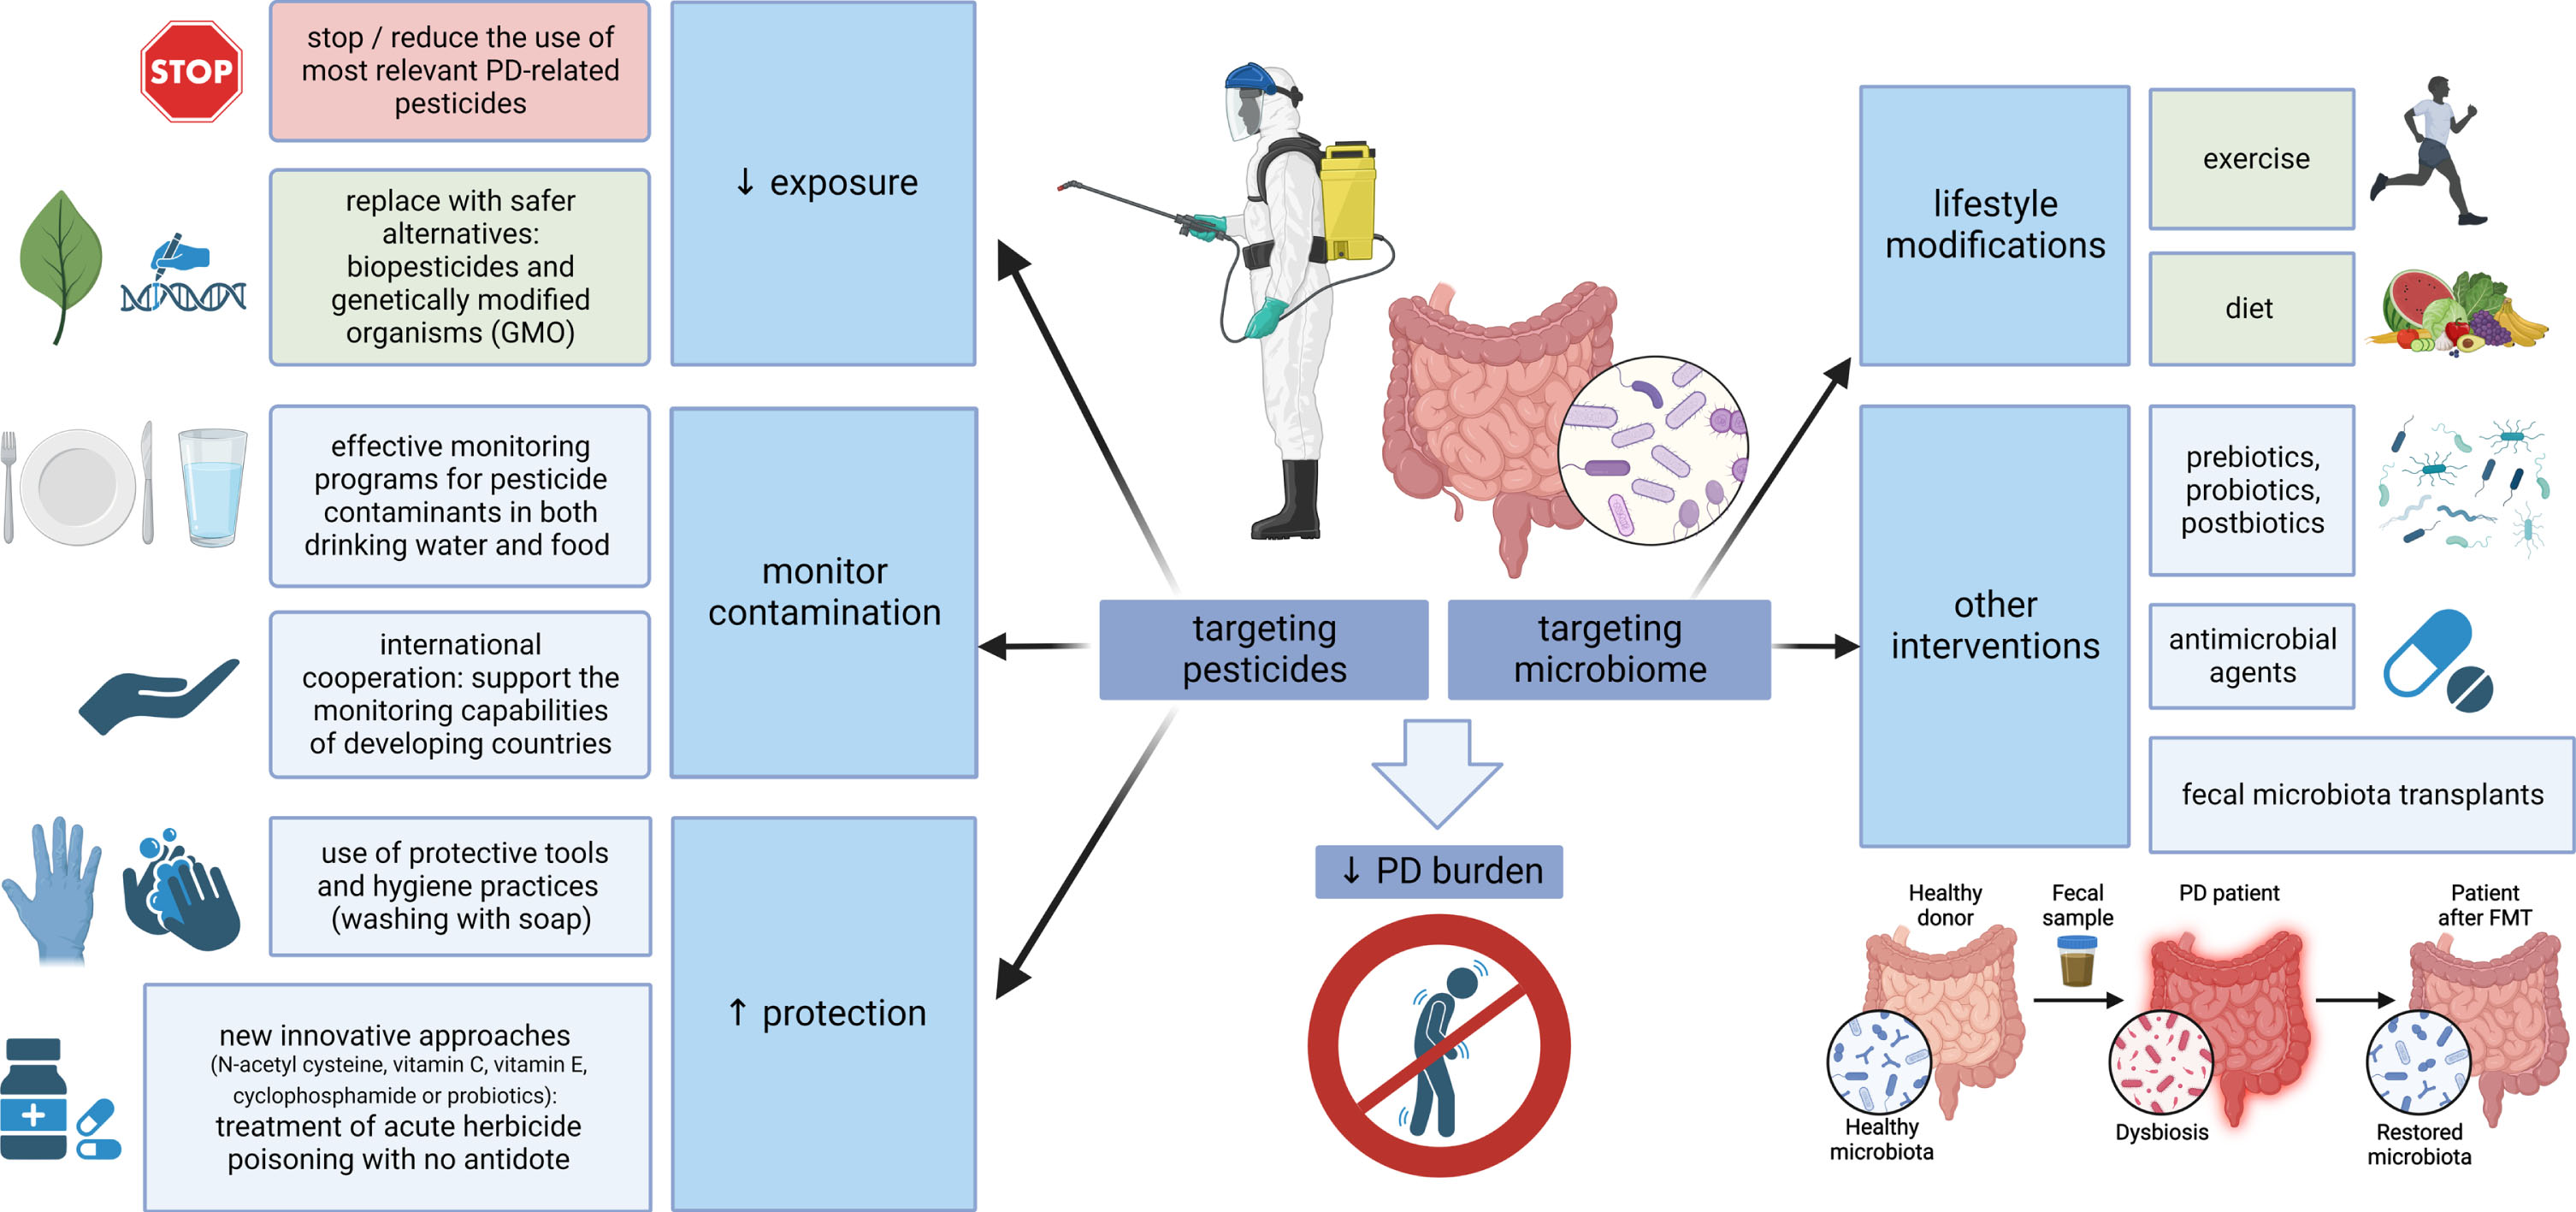 Targeting pesticides and the microbiome-gut-brain axis. Multiple measures are at hand to reduce the global burden of PD, aimed at both pesticides and microbiome. Where possible, the use of PD-relevant pesticides should be reduced and replaced by safer alternatives; effective monitoring should control food and water contamination, and protective measures, such as the use of personal protective equipment or new approaches for the treatment of poisoning, should be emphasized where pesticide exposure is inevitable. On the other hand, strategies aimed at strengthening the microbiome could be used on a large scale (general lifestyle modifications, such as exercise and a healthy diet), while more targeted interventions, including the use of pre/pro/postbiotics, antimicrobial agents or fecal microbiota transplants, could be relevant in specific conditions associated with pesticide exposure. PD, Parkinson’s disease; GMO, genetically modified organisms.